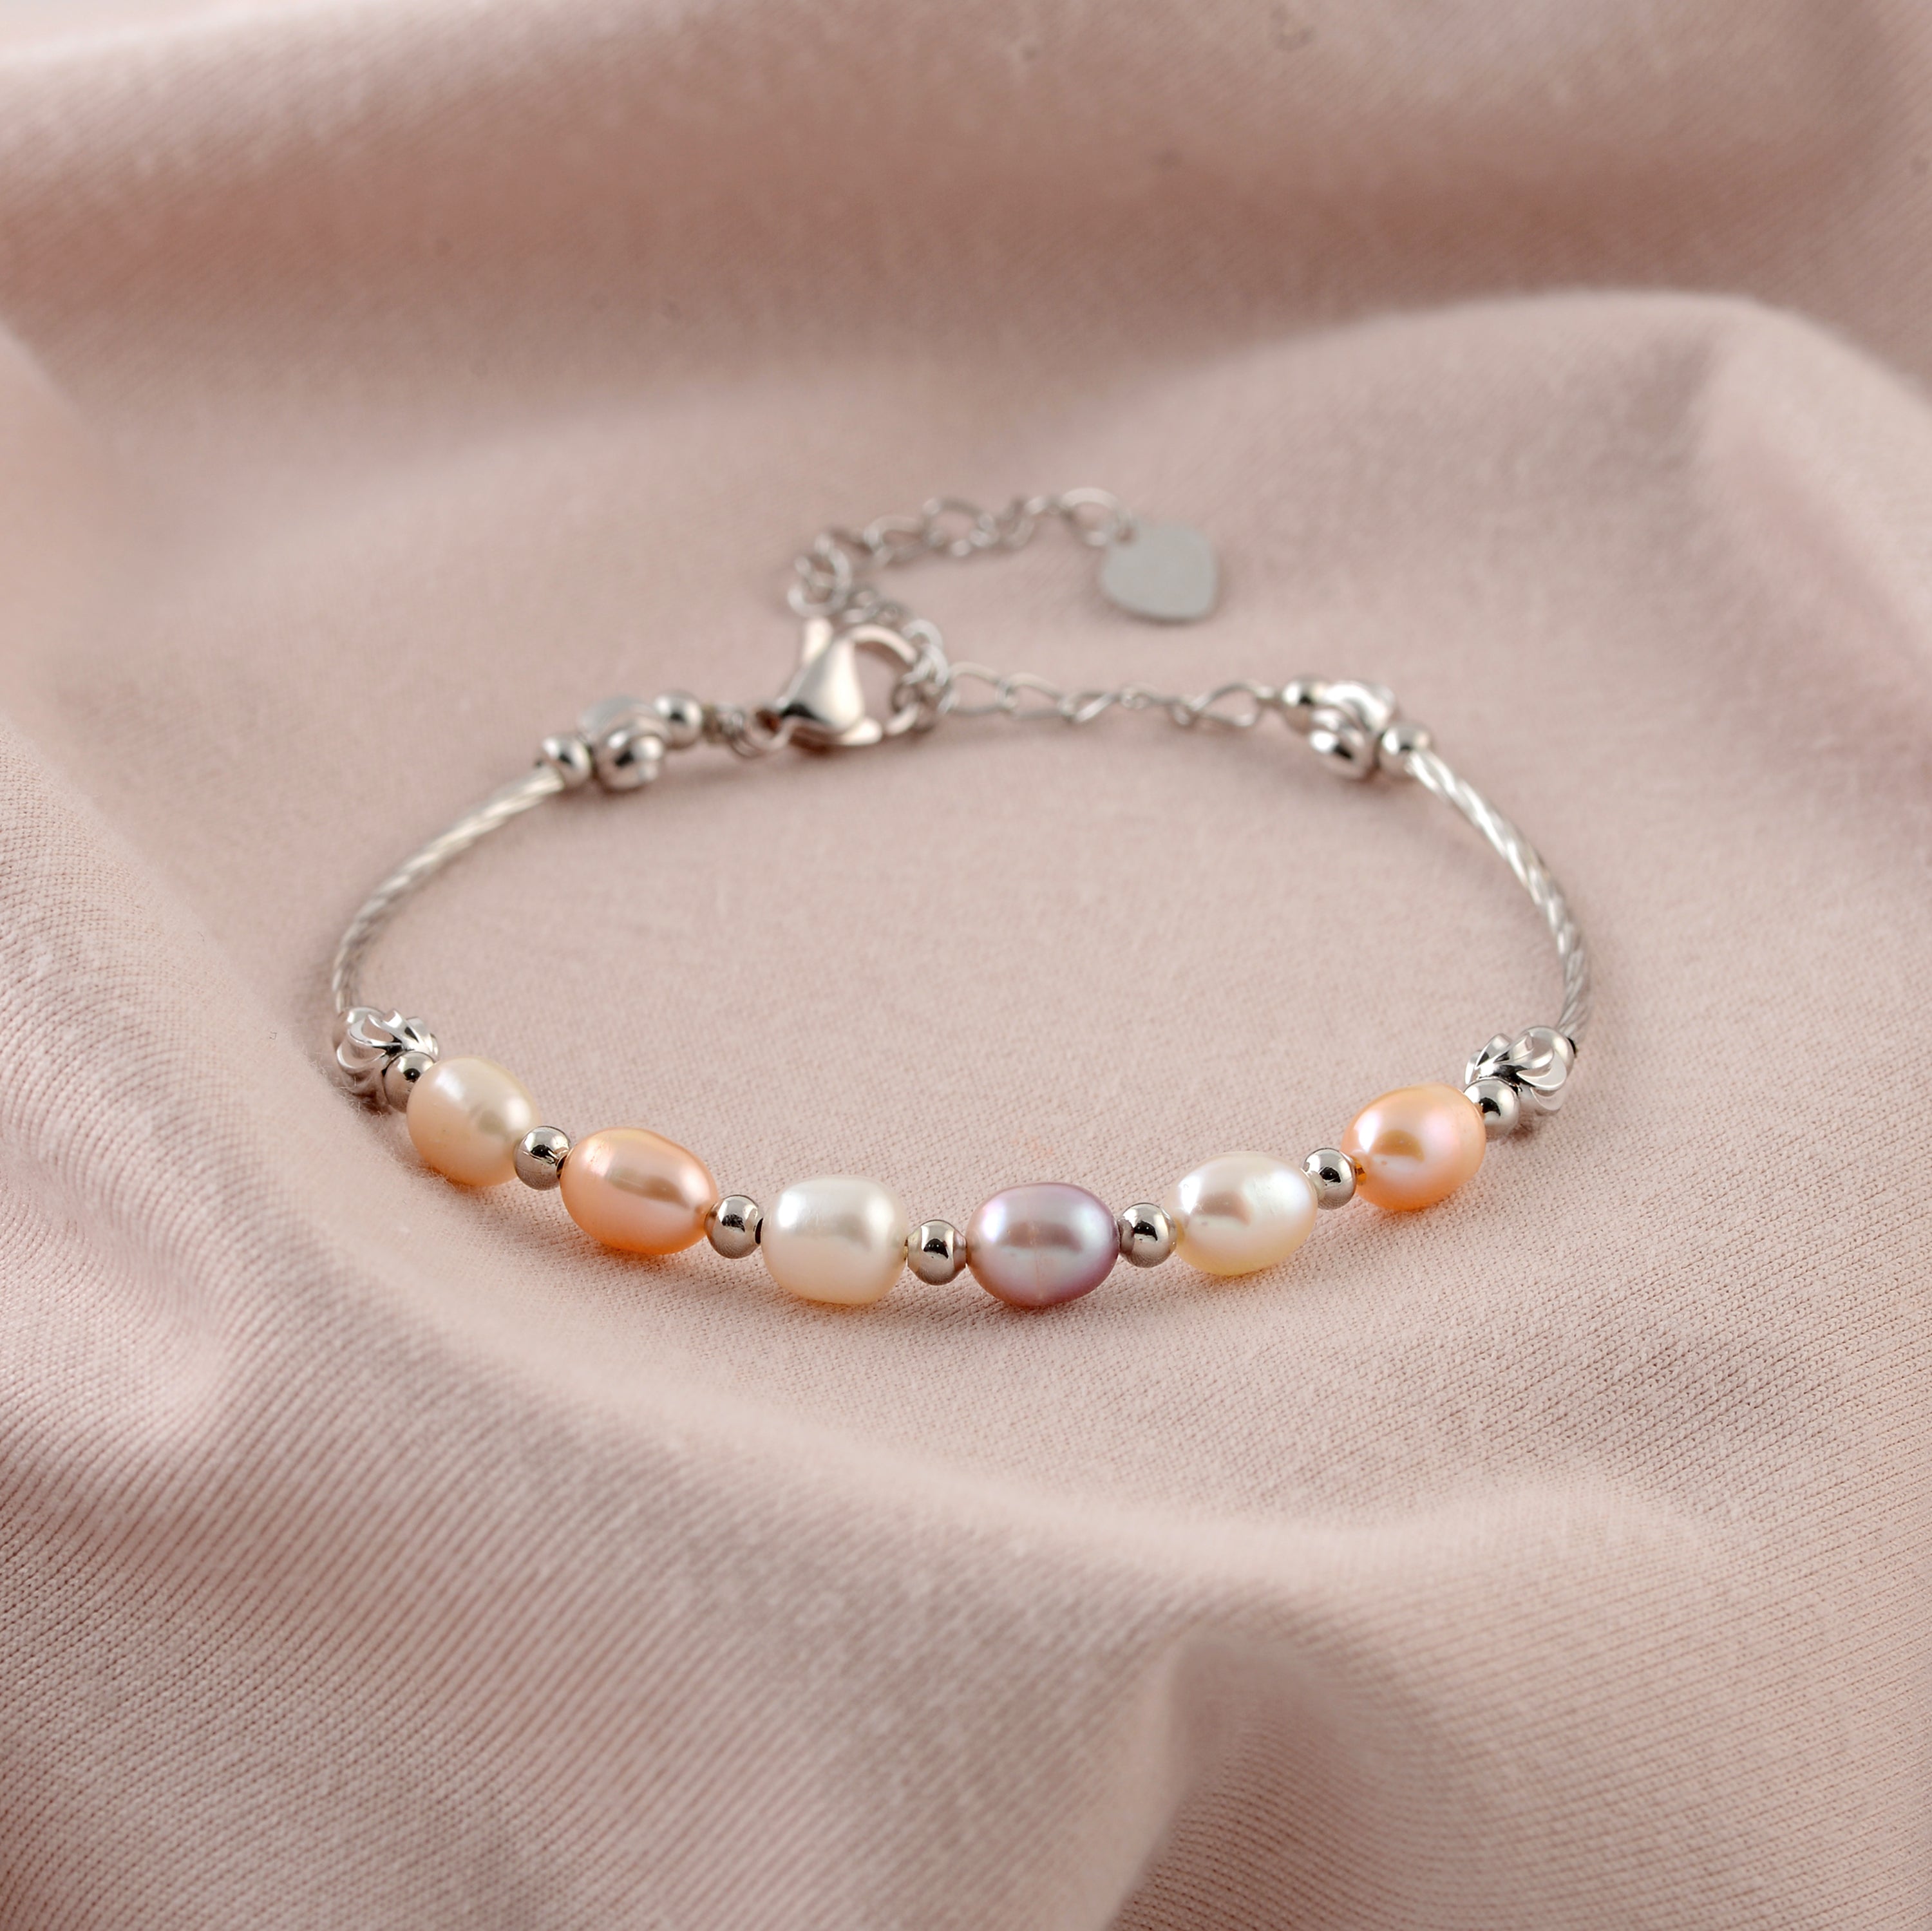 Charming Sterling Silver Bracelet With Pink Pearls